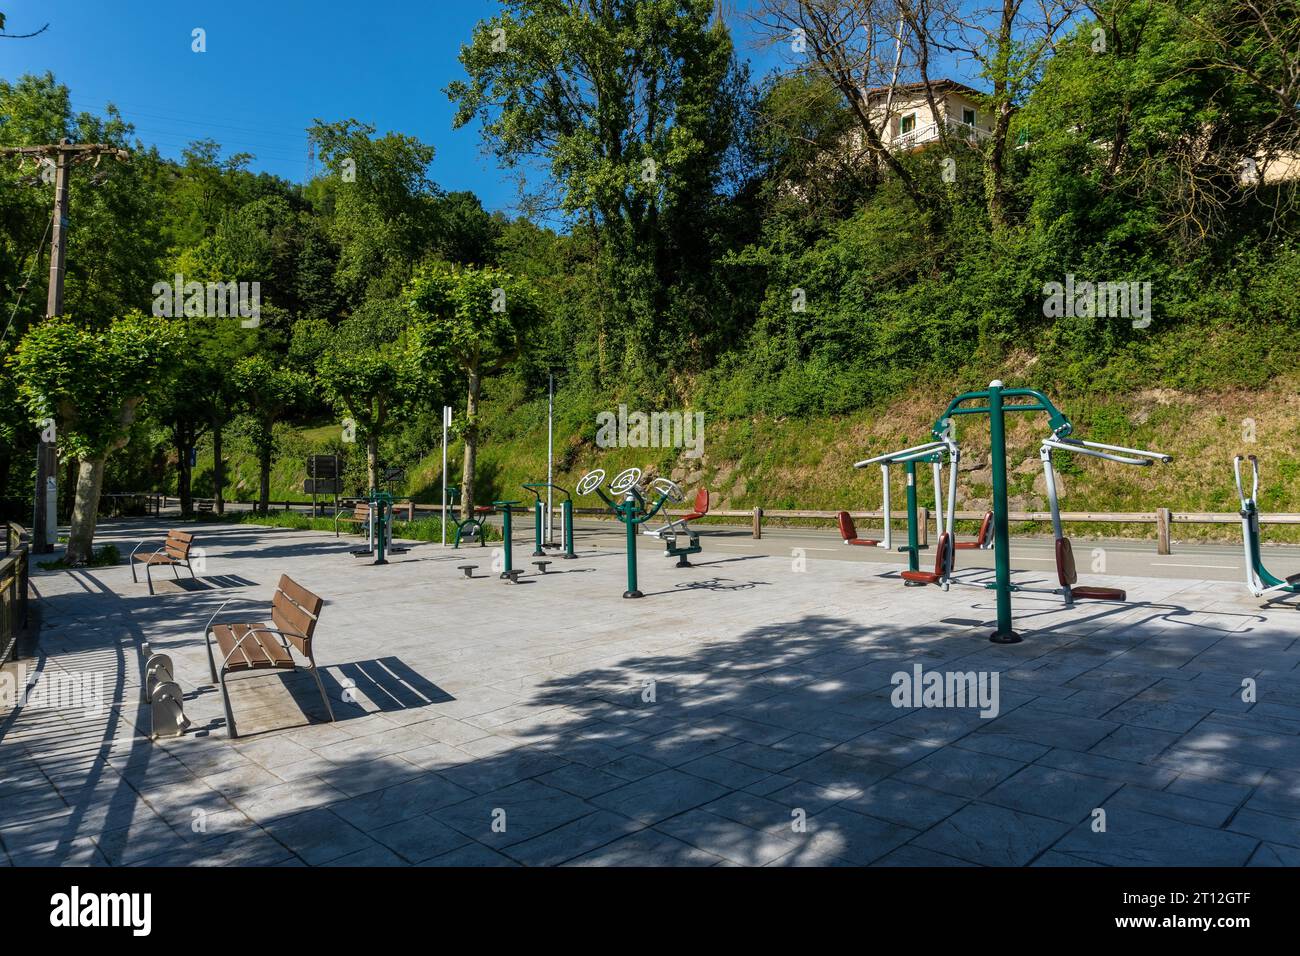 Park to exercise in the municipality of Lezo, the small coastal town in the province of Gipuzkoa, Basque Country. Spain Stock Photo